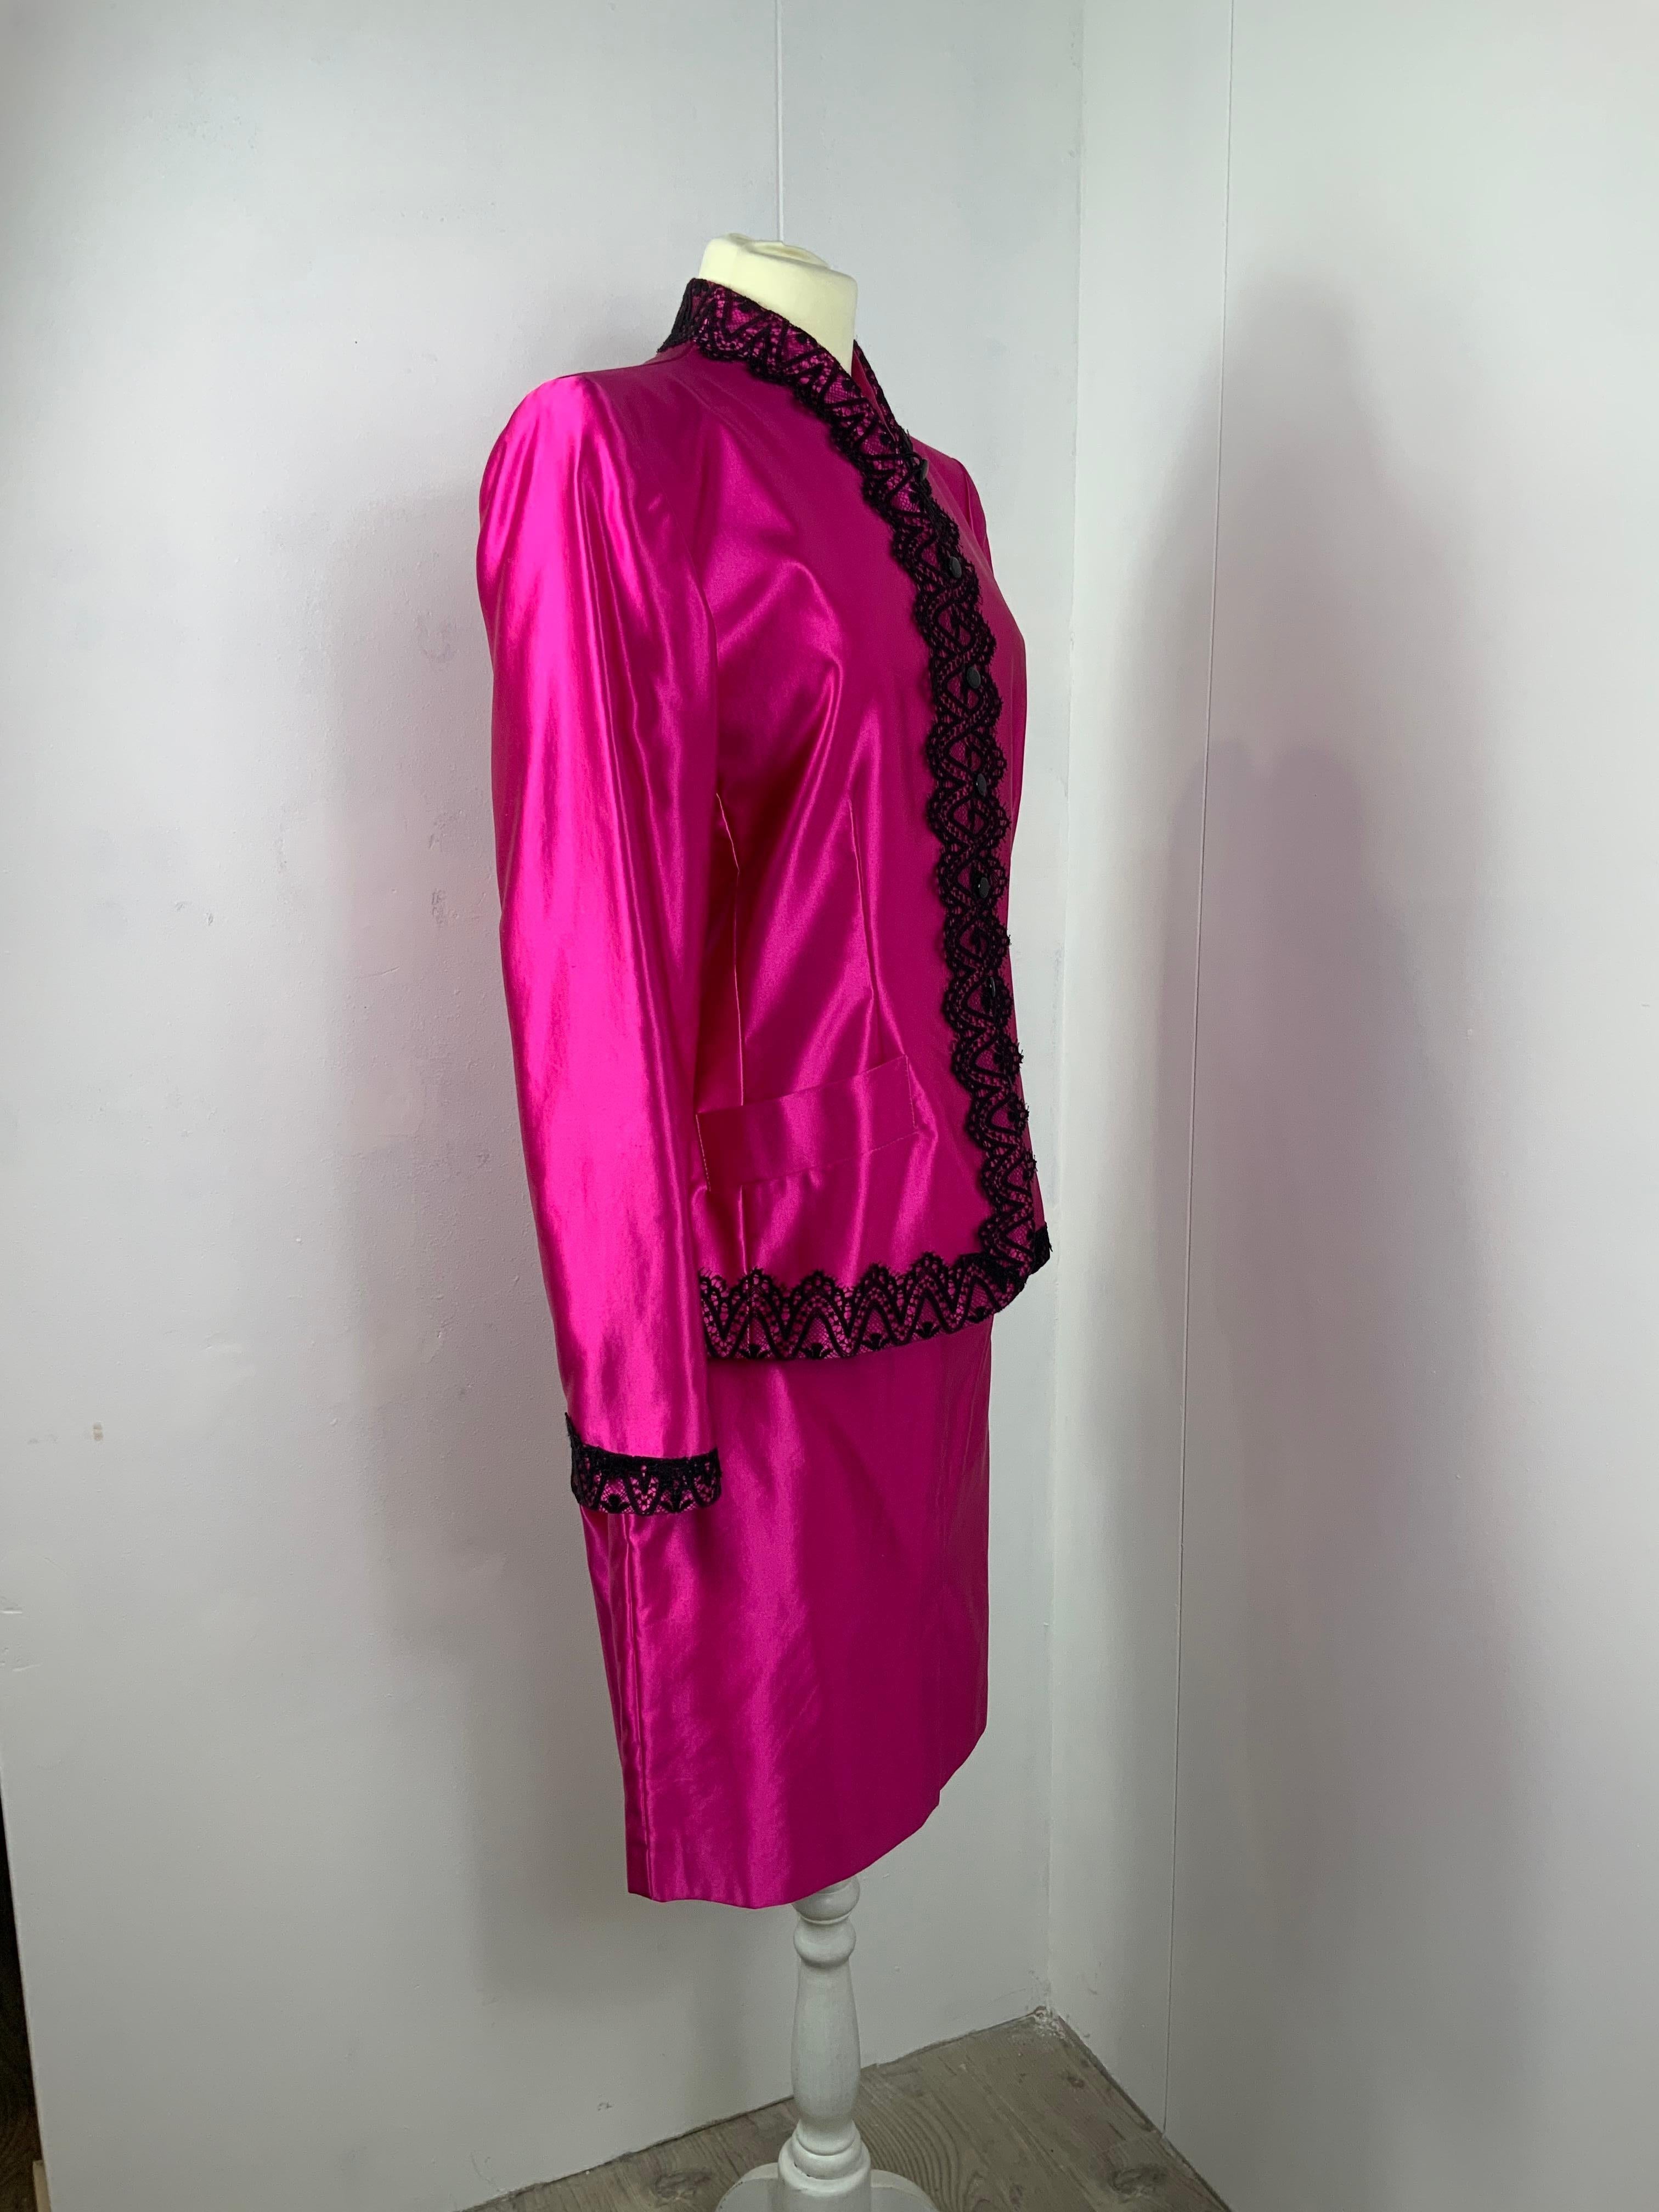 Yves Saint Laurent, Variation Tailleur.
Jacket + skirt. Made in France.
Fabric is a mix between cotton and silk. Amazing shining Fucsia.
Fully lined in red acetate fabric.
Featuring two front pockets and black lace details.
Jacket shows a little